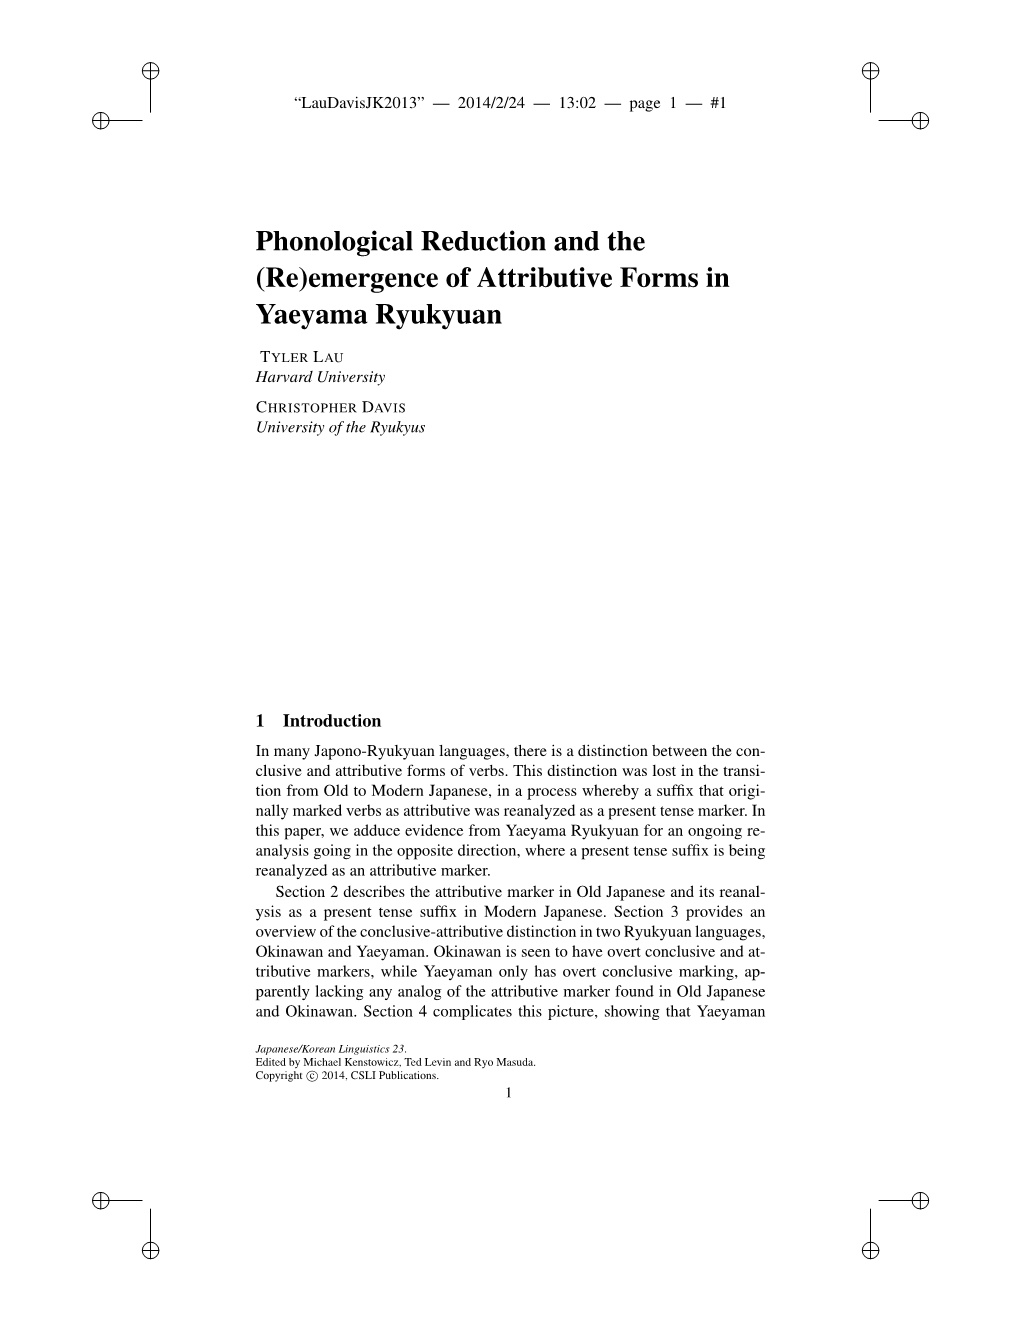 Phonological Reduction and the (Re)Emergence of Attributive Forms in Yaeyama Ryukyuan